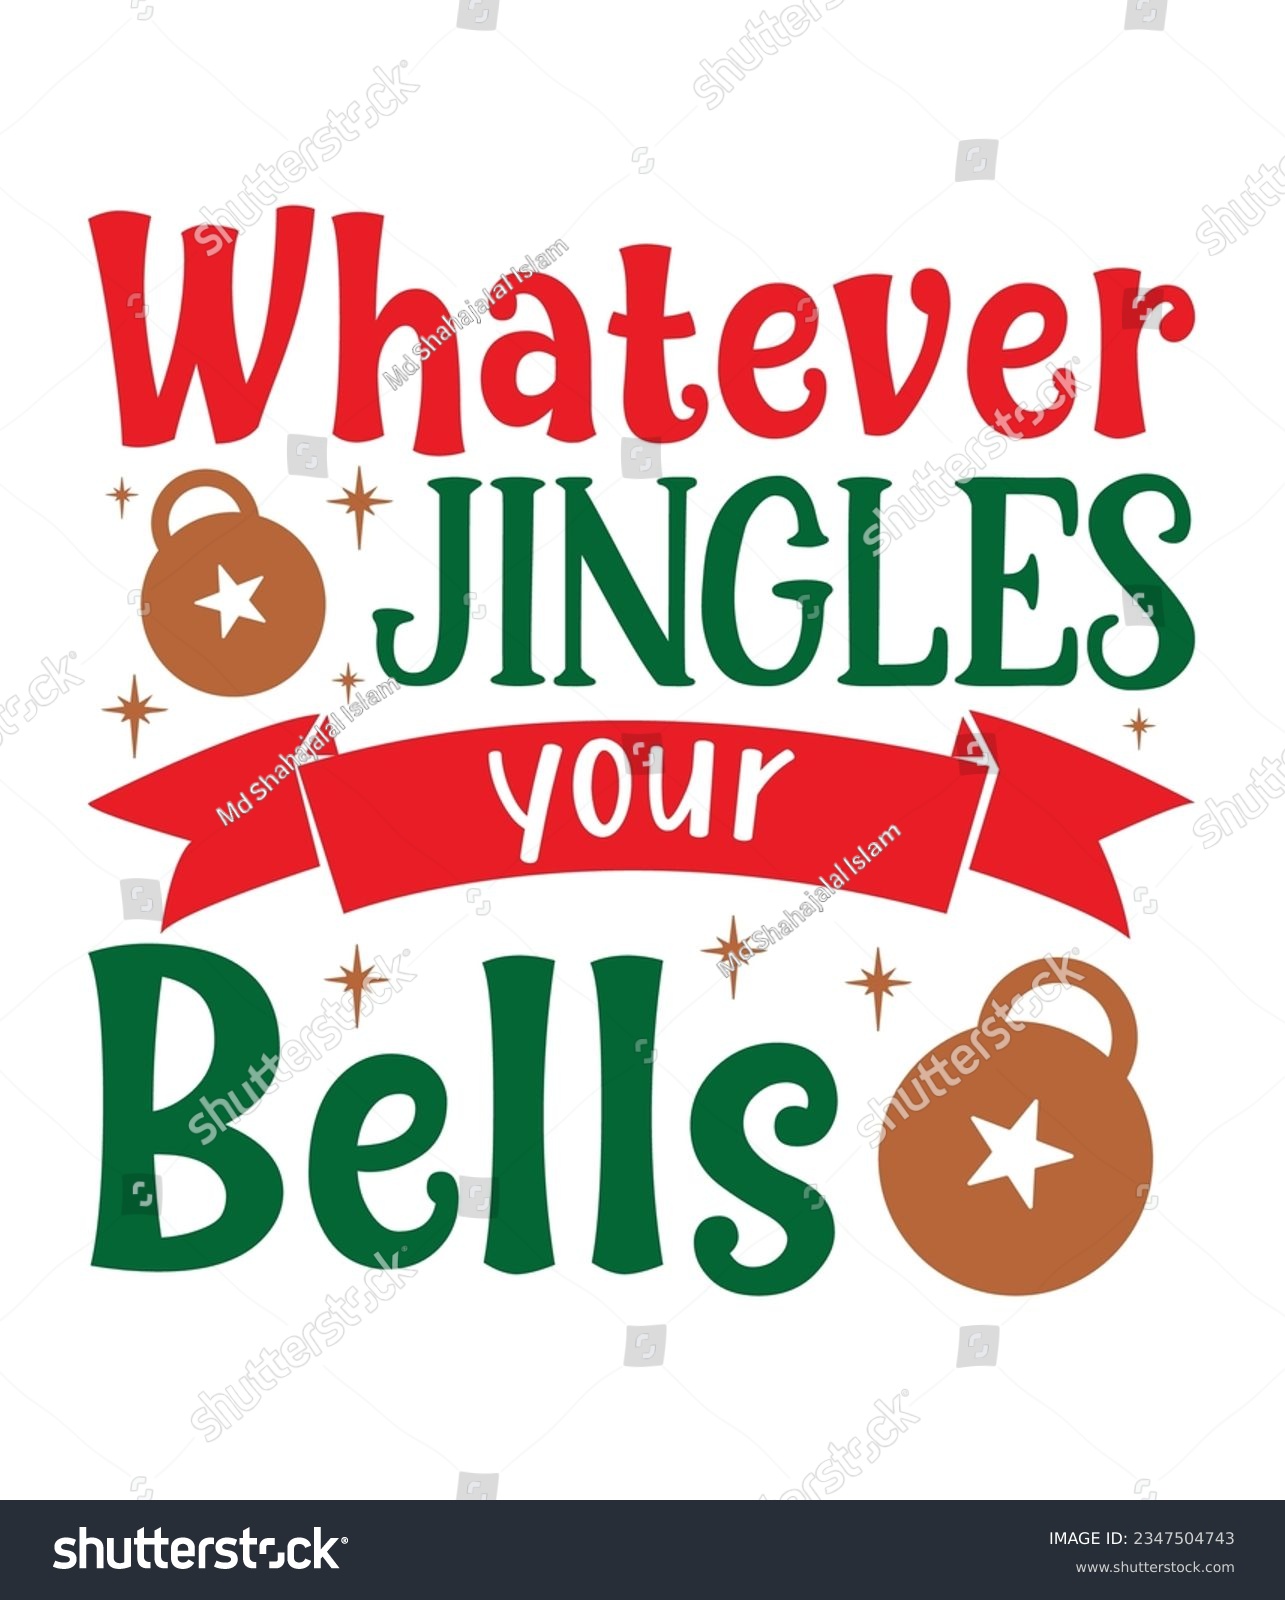 SVG of Whatever jingles your bells, Christmas SVG, Funny Christmas Quotes, Winter SVG, Merry Christmas, Santa SVG, typography, vintage, t shirts design, Holiday shirt svg